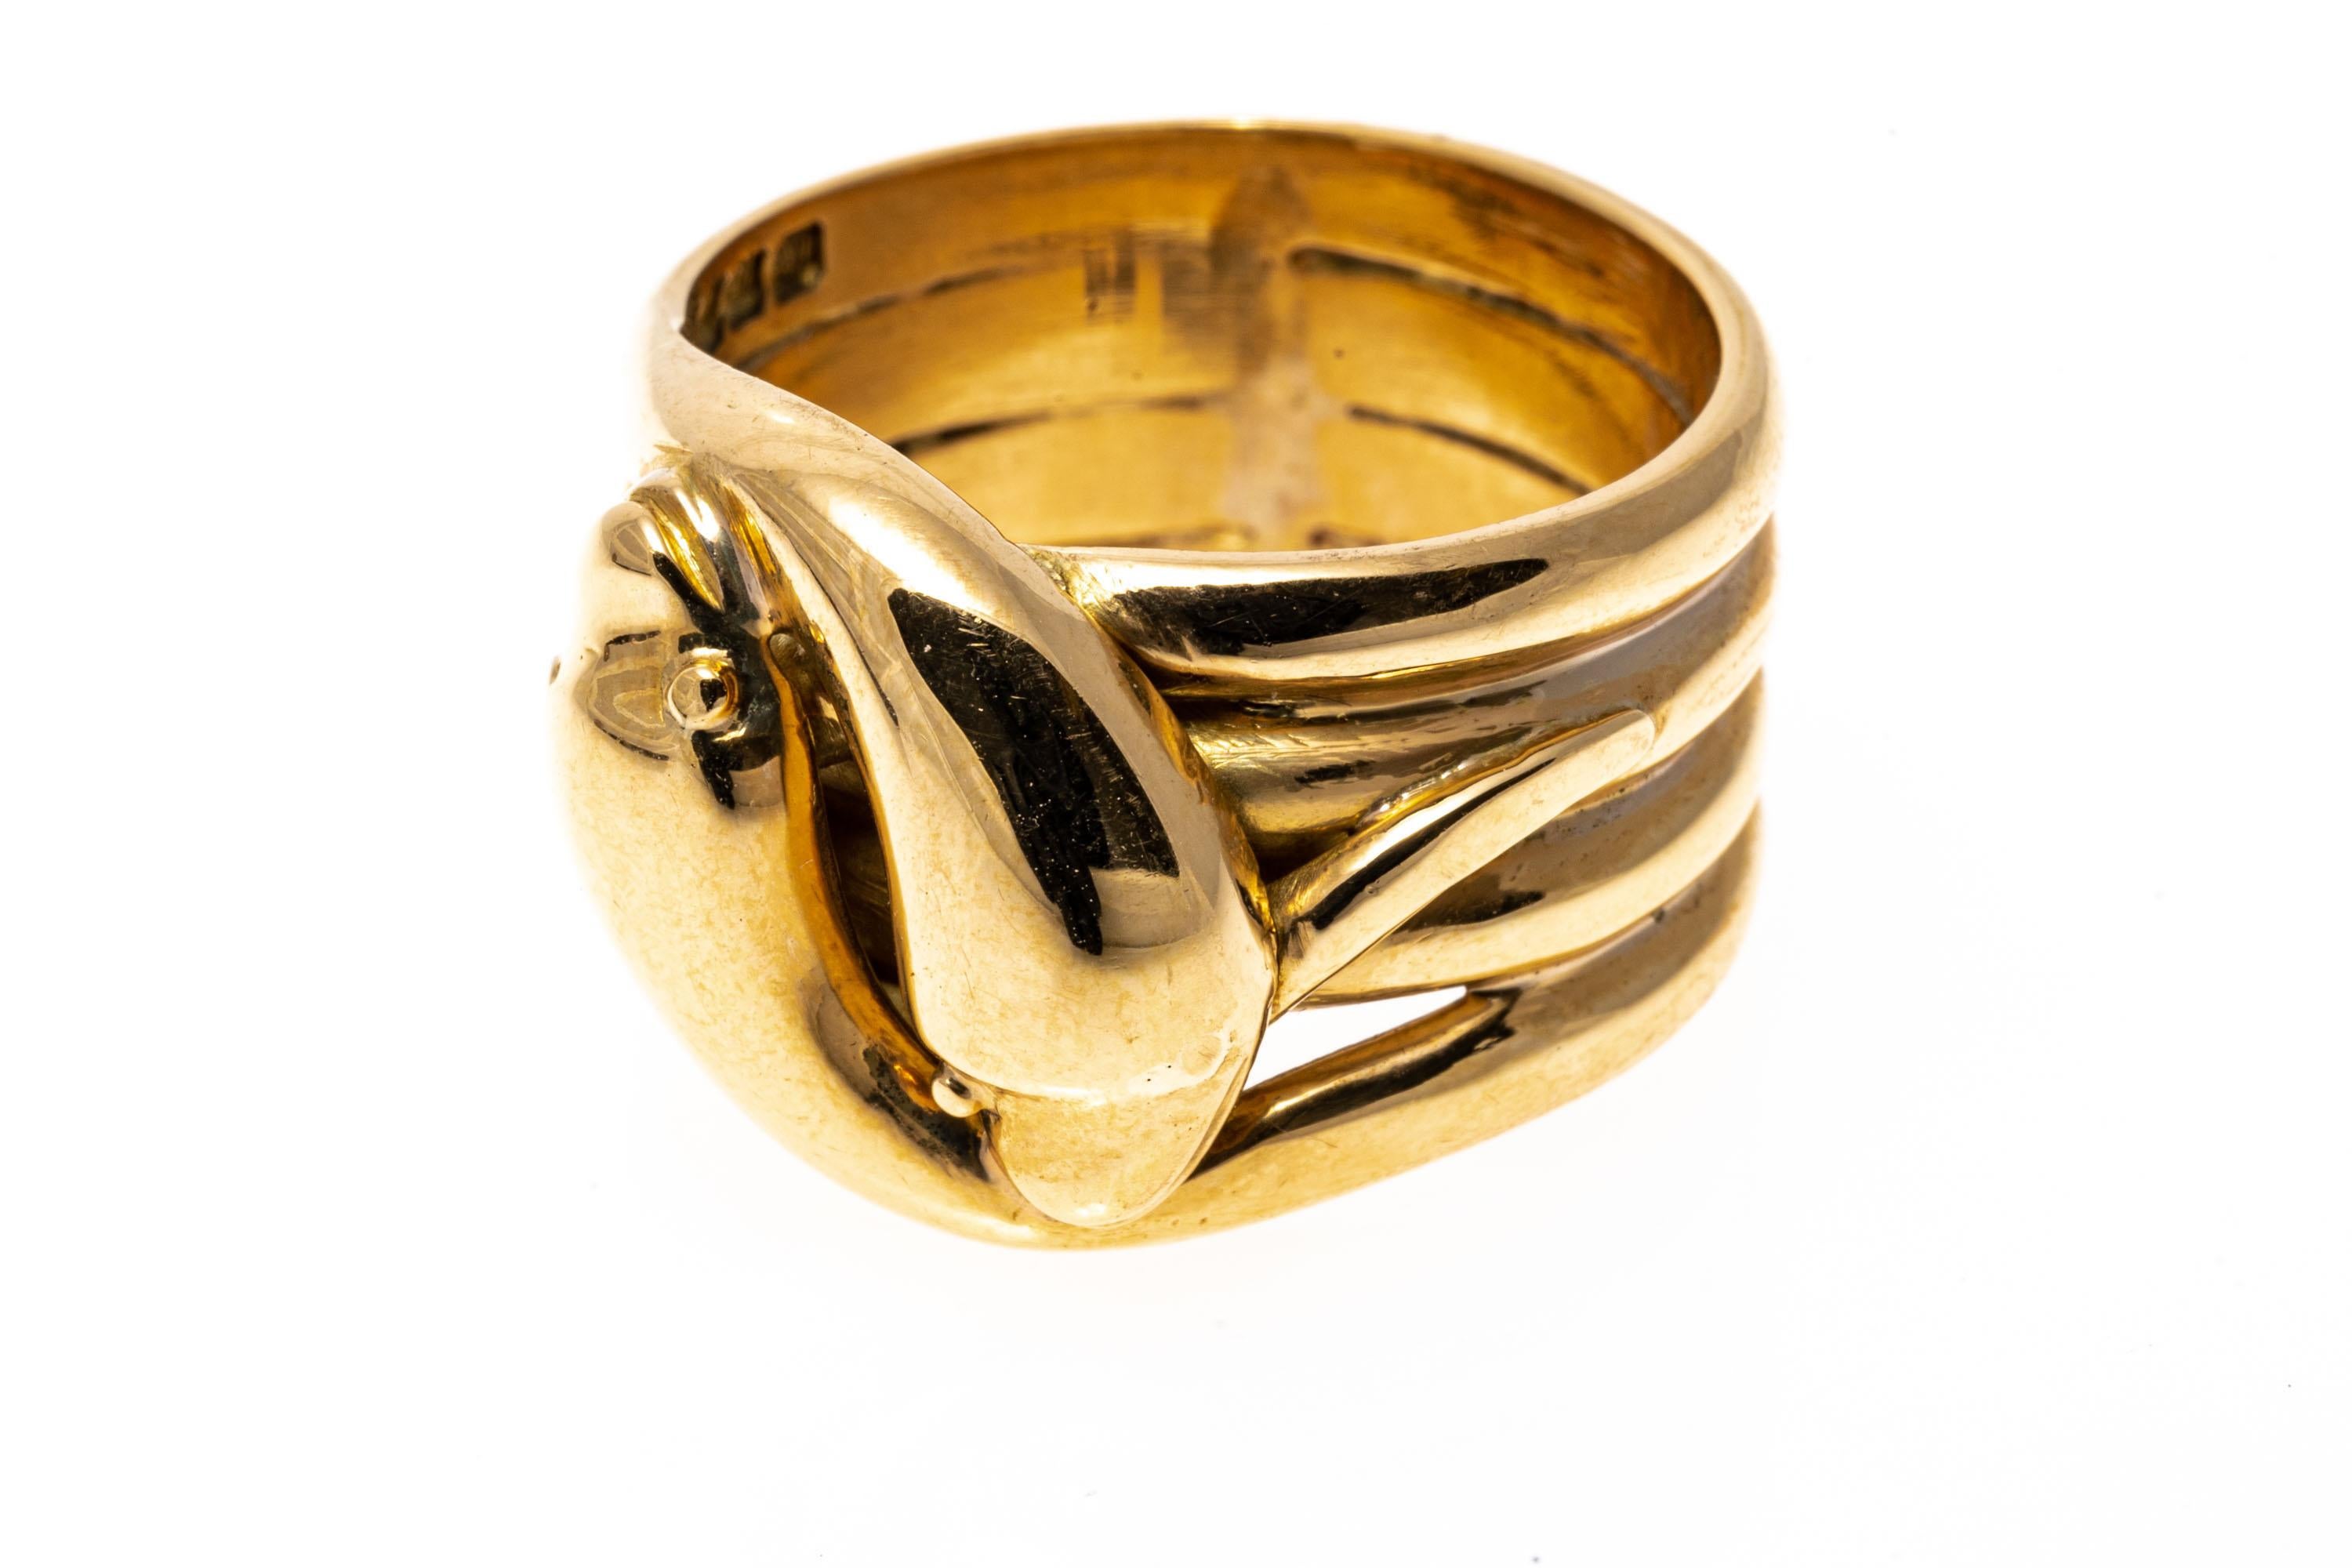 18k yellow gold ring. This striking, contemporary ultra wide four row band ring is an intertwining serpent motif of two bypassing snakes, with a high polished finished body.
Marks: 18k
Dimensions: 9/16